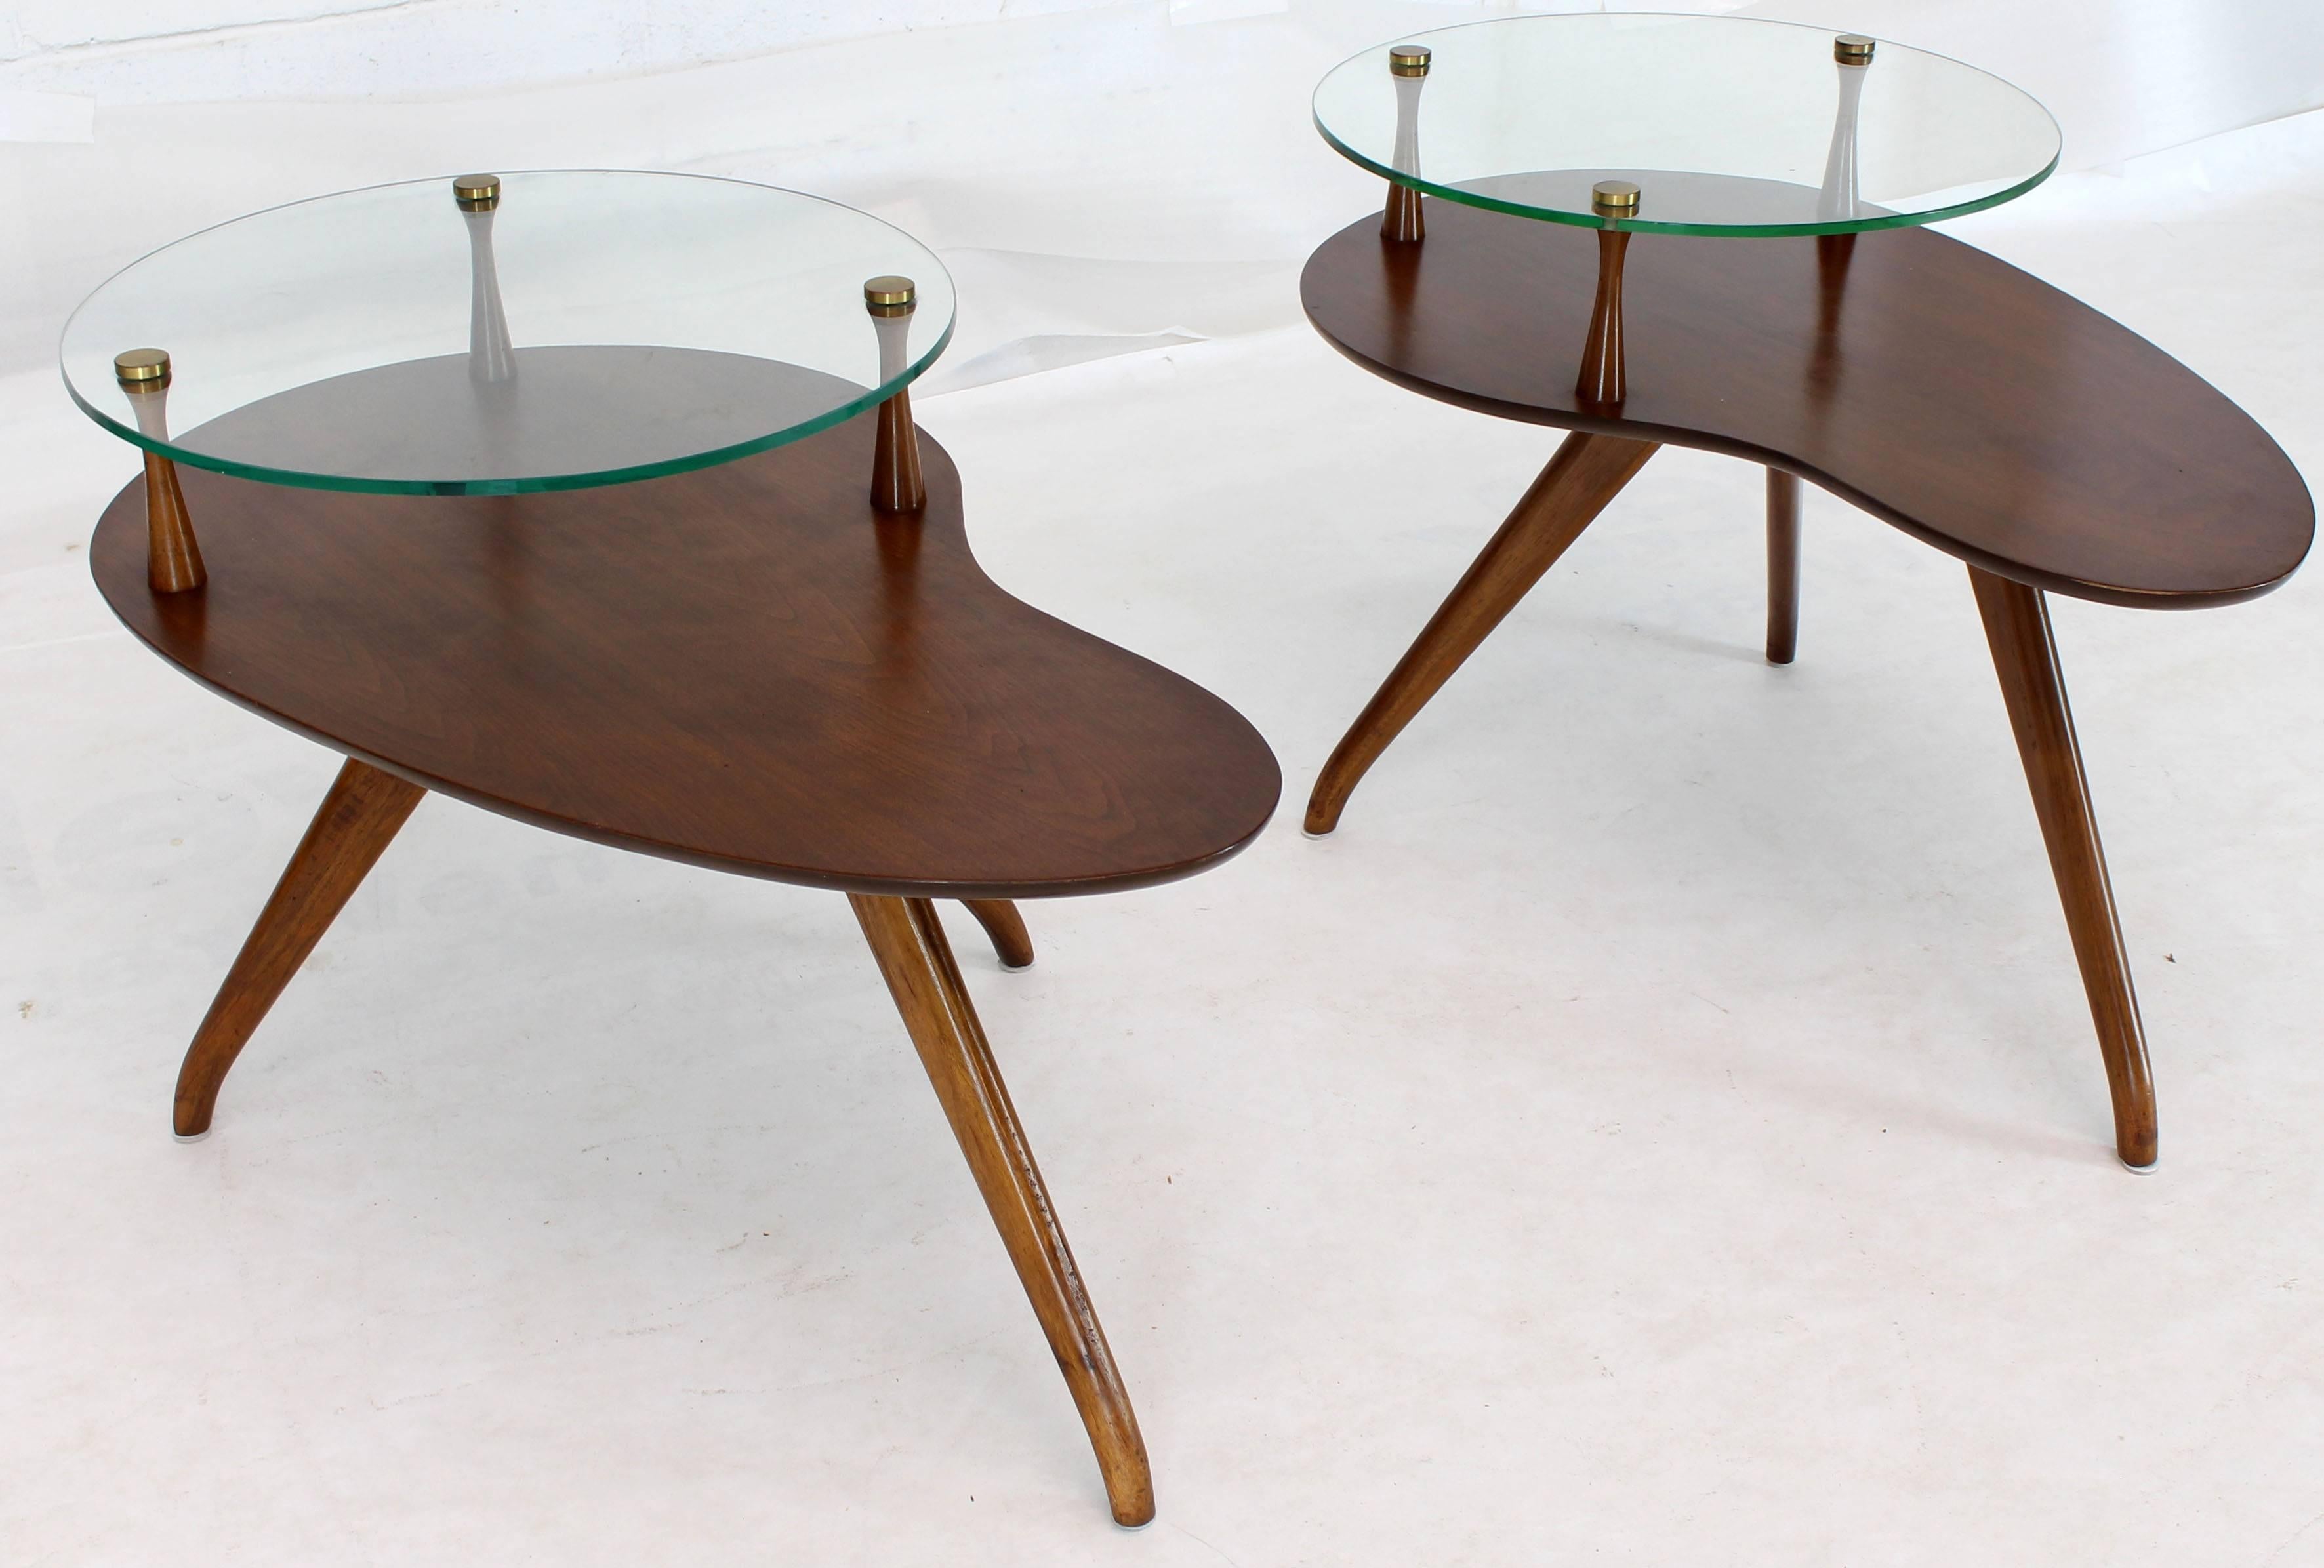 American Pair of Kidney Organic Shape Two-Tier Tri-Legged Side Tables For Sale